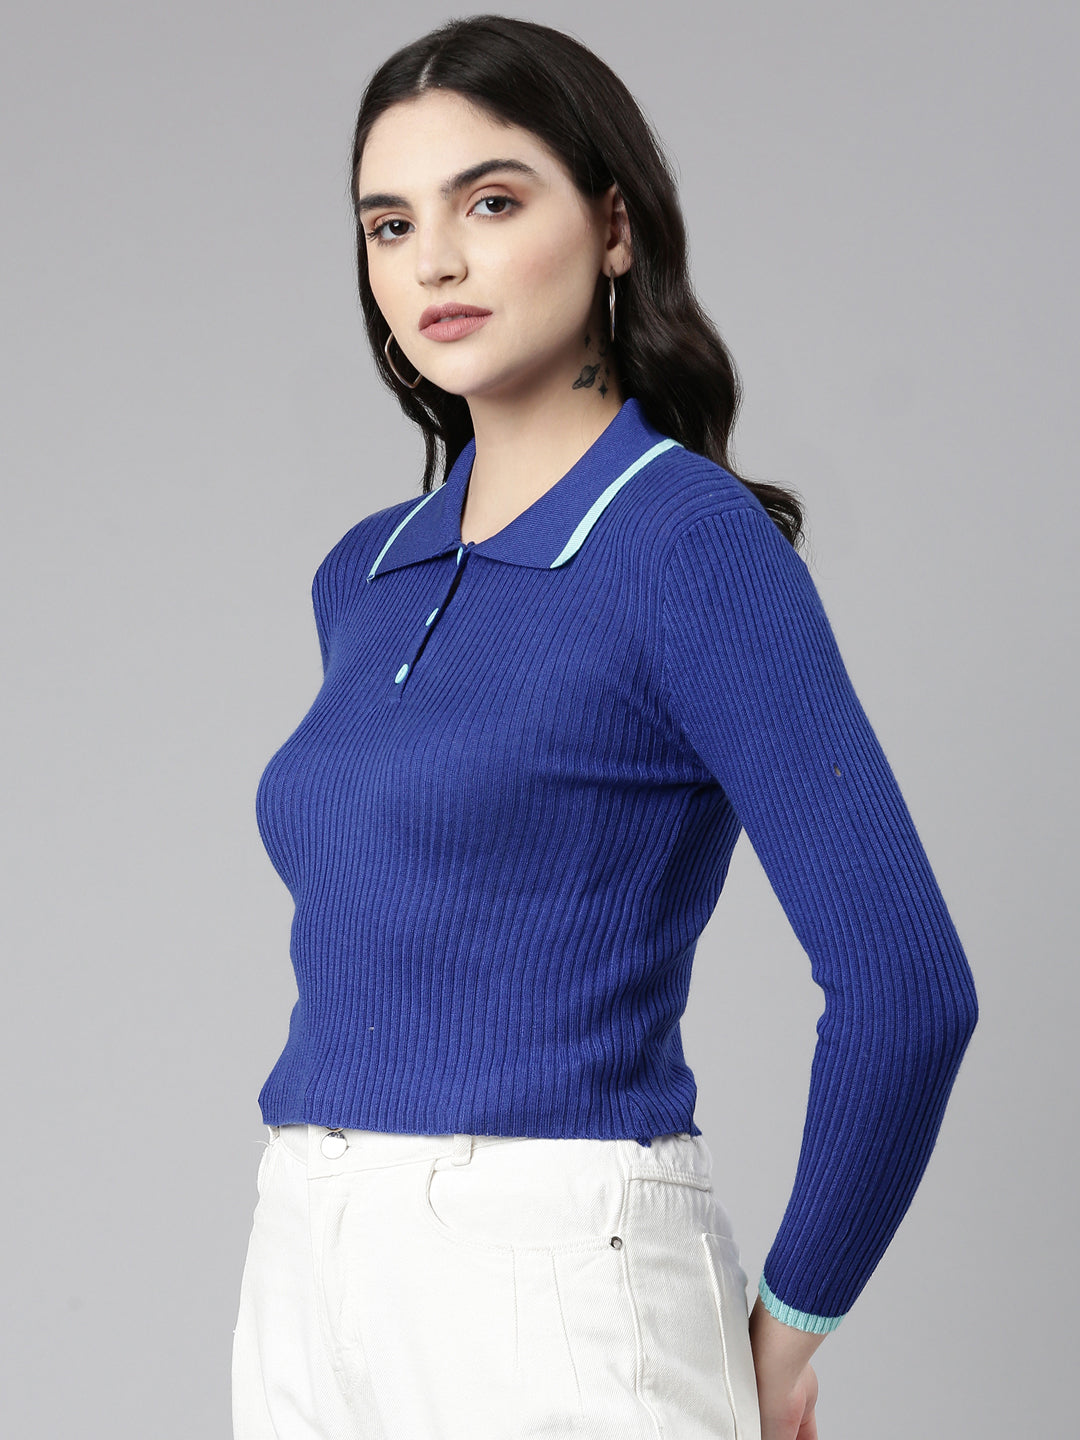 Above the Keyboard Collar Solid Regular Sleeves Fitted Blue Regular Top